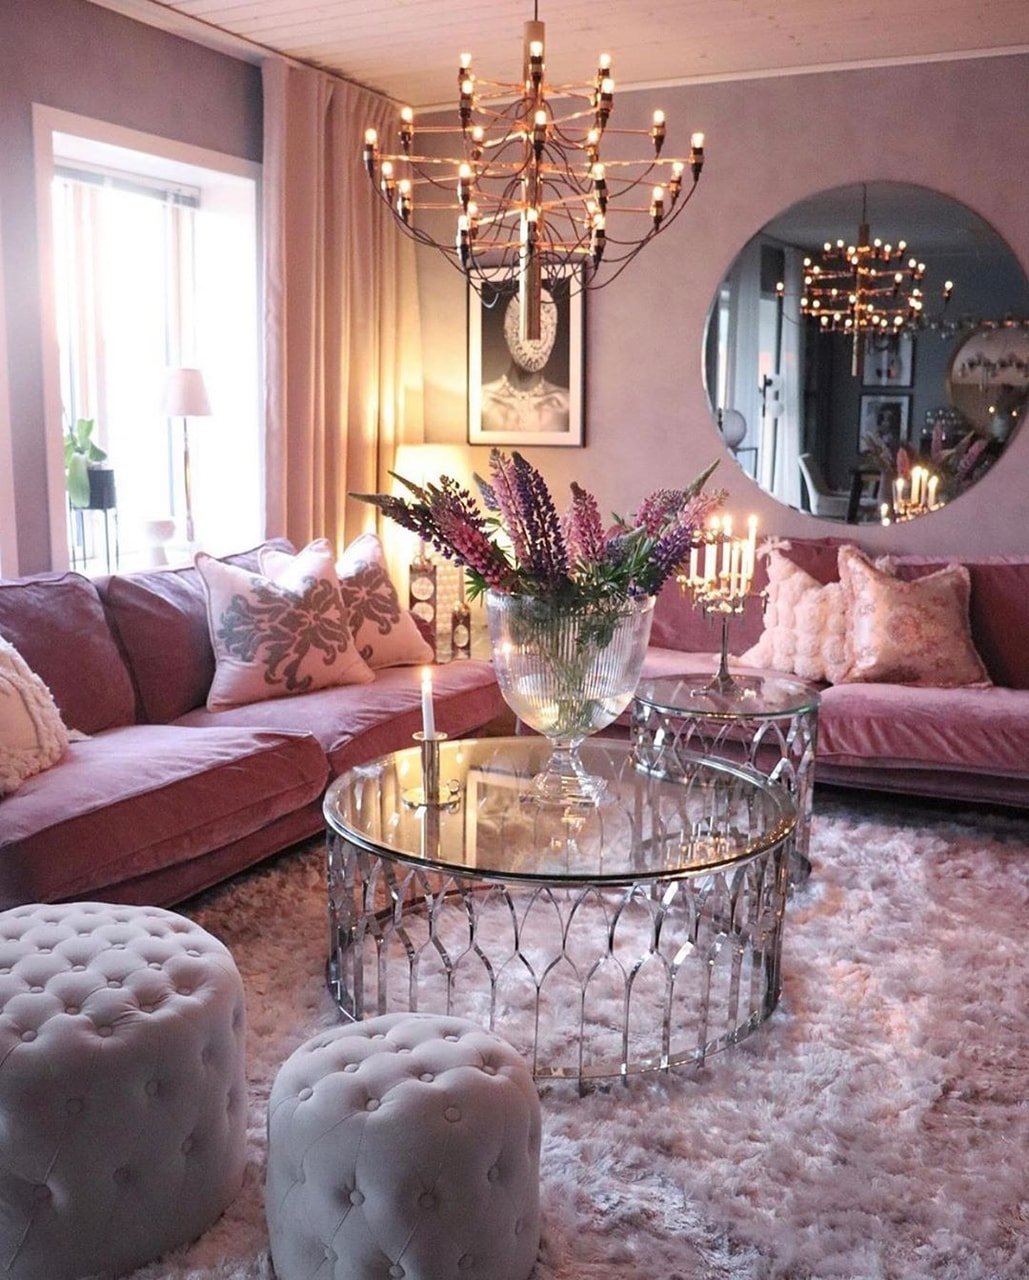 Lovely Home Design Ideas in Pink Shades